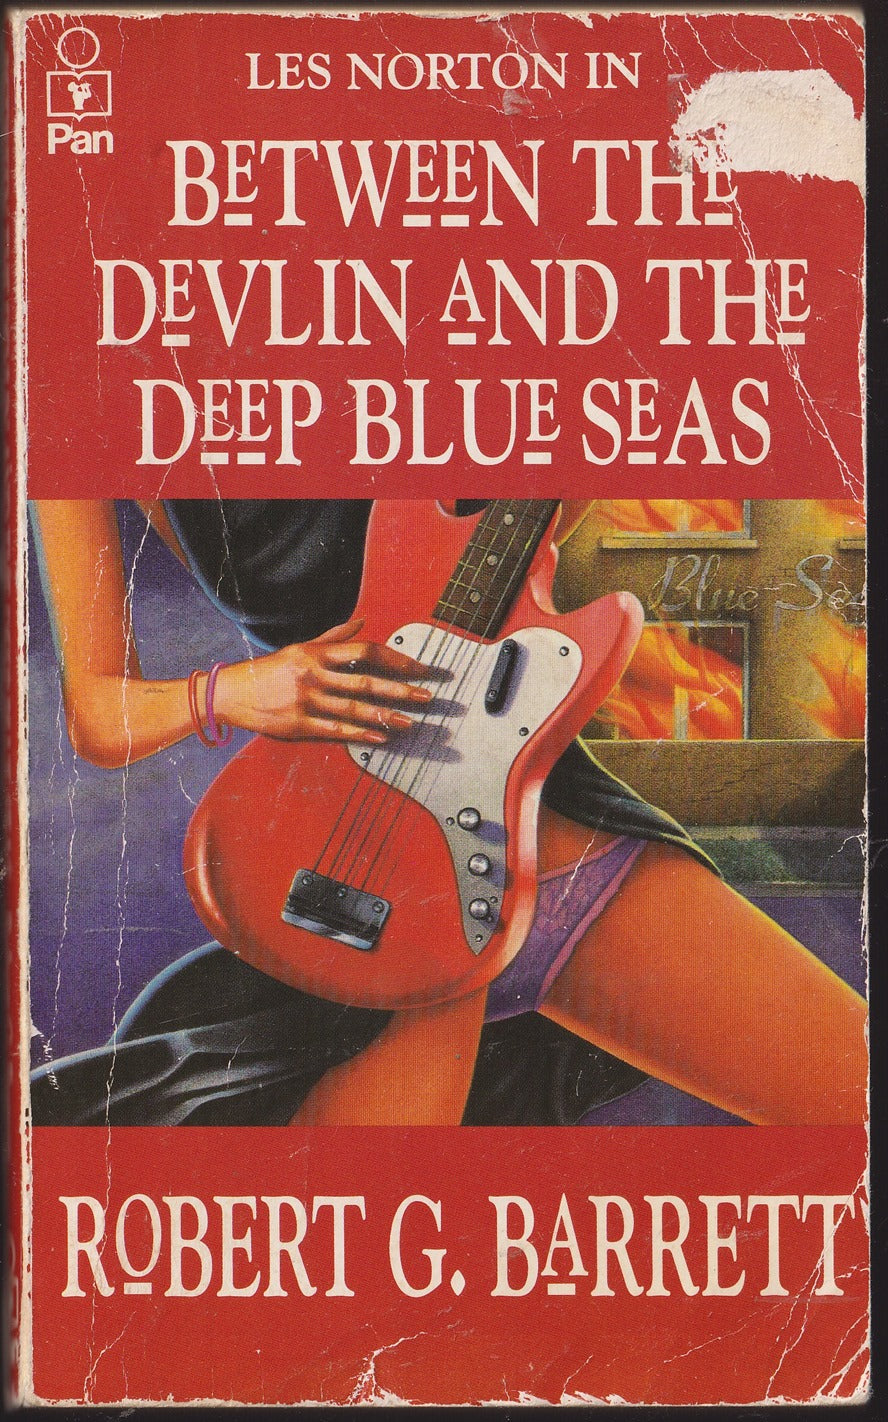 Between the Devlin and the Deep Blue Seas (Les Norton)